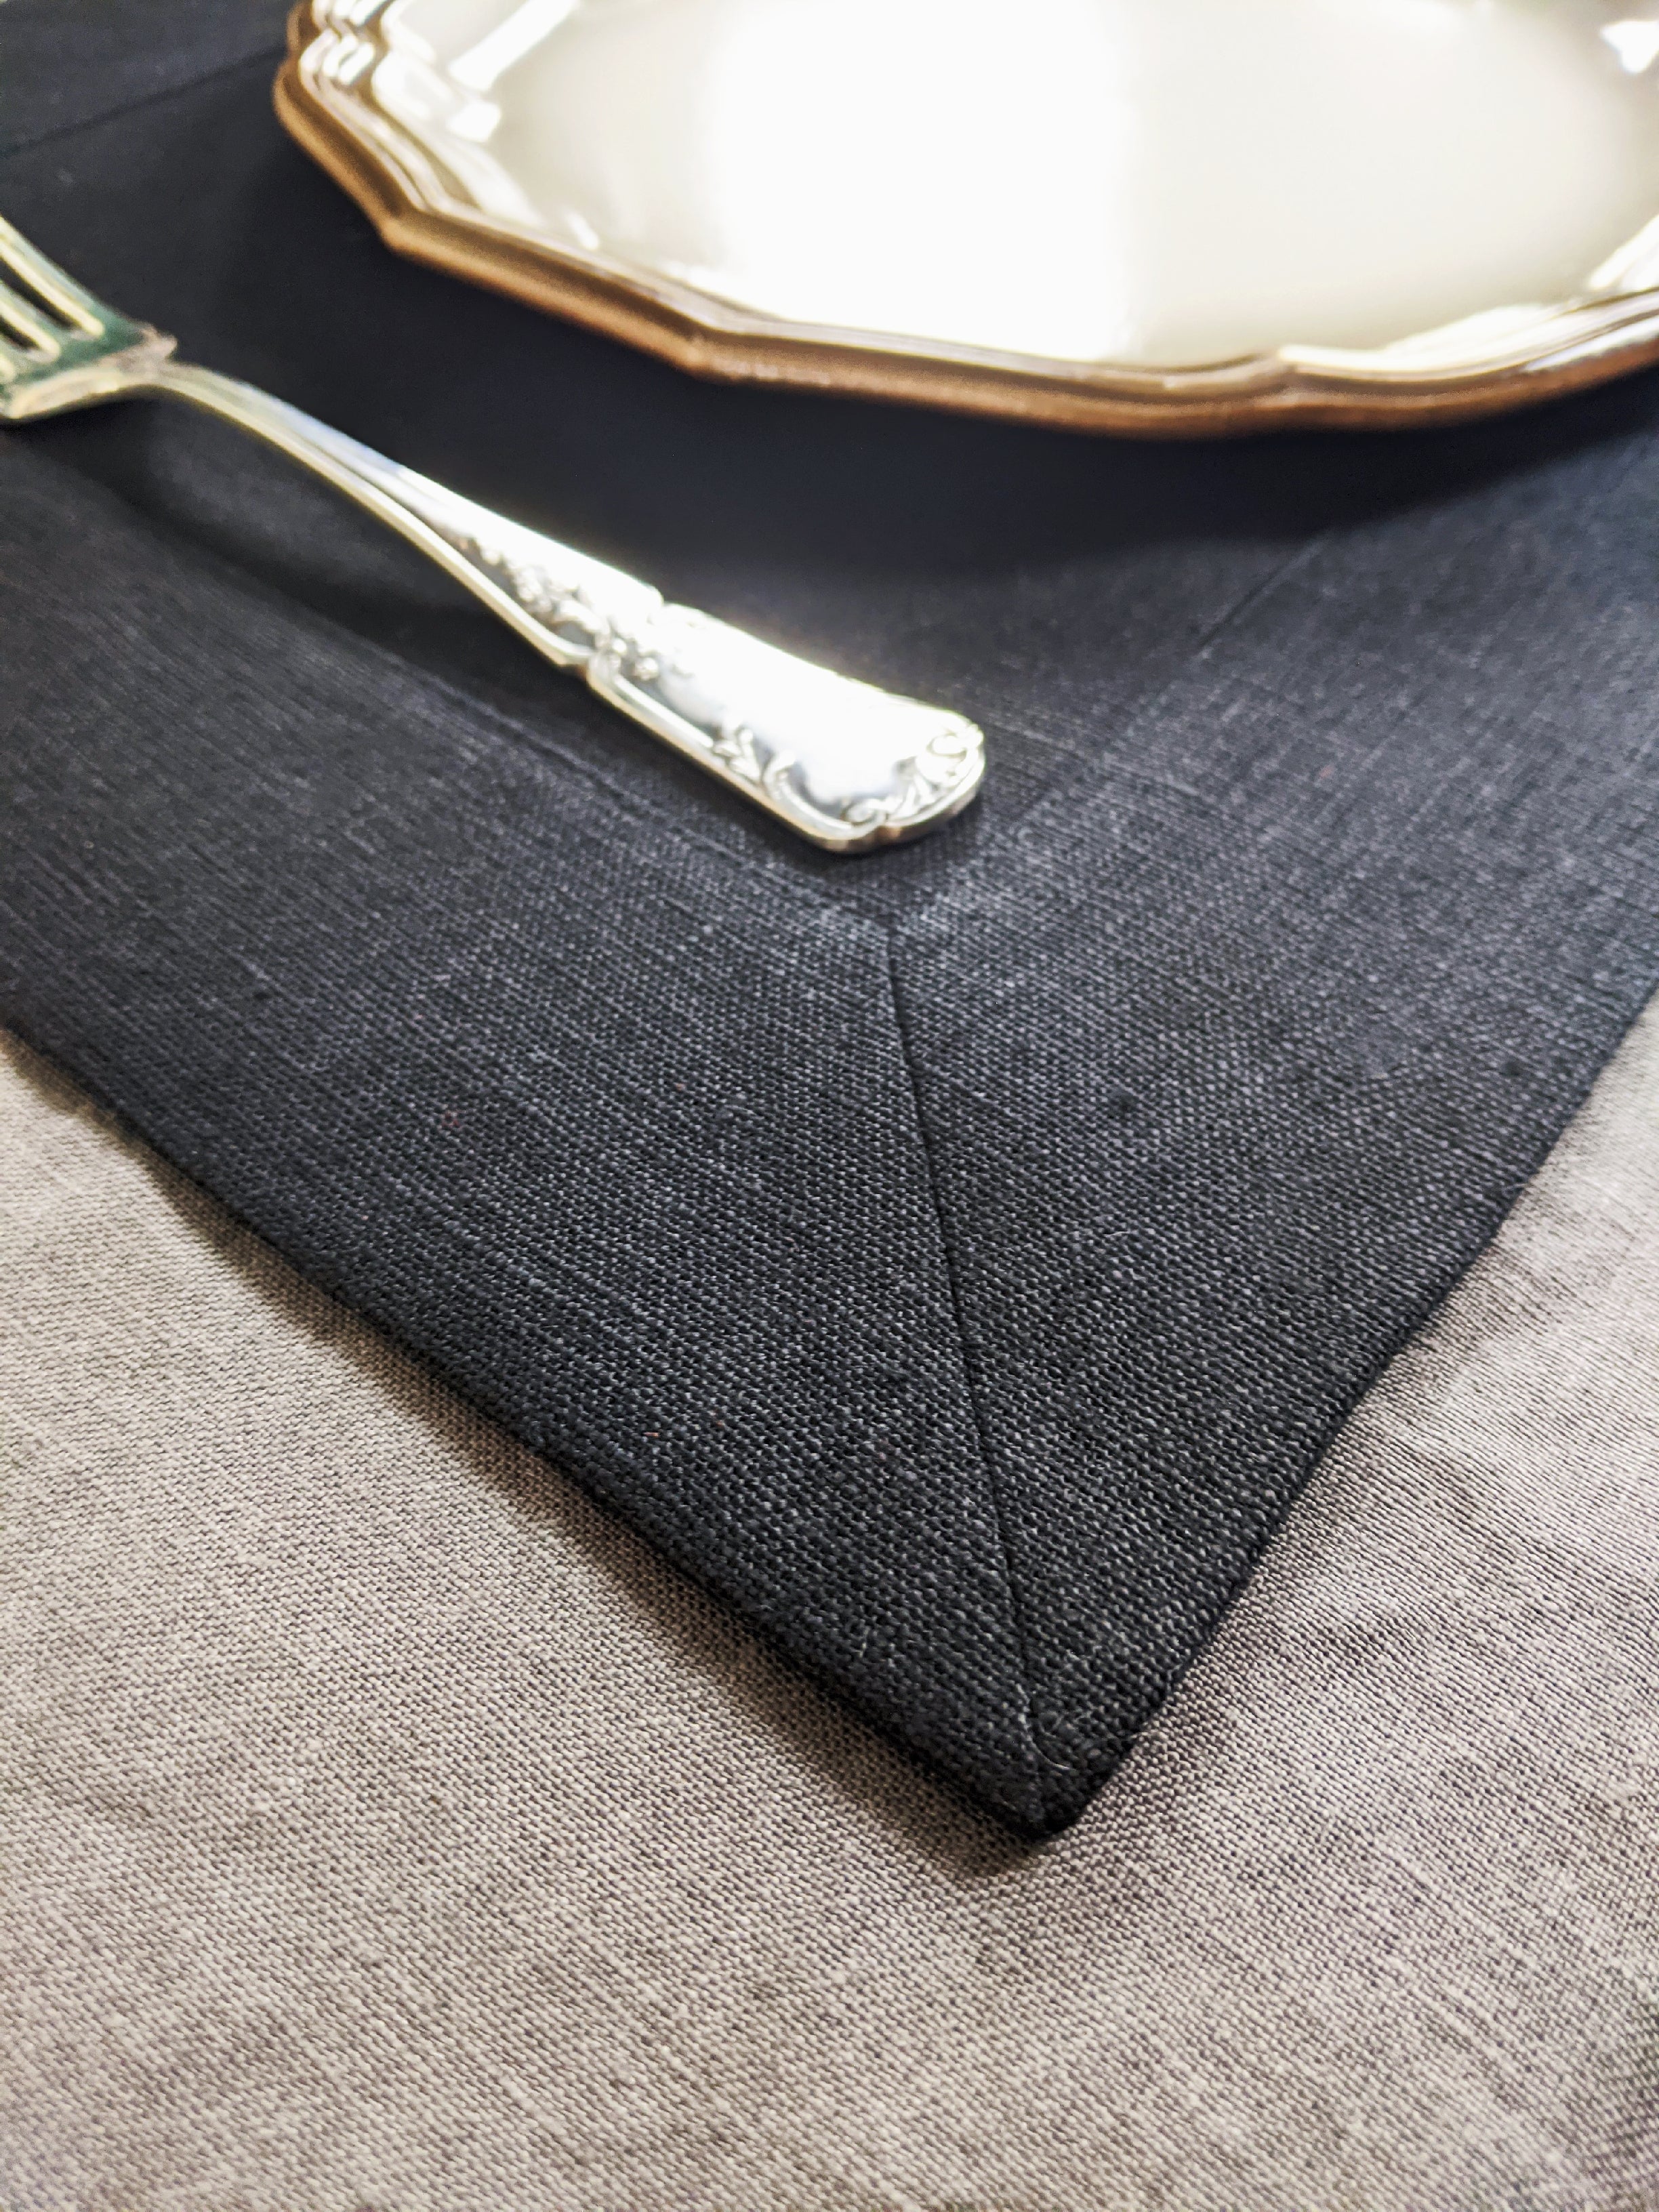 Linen table placemat in black